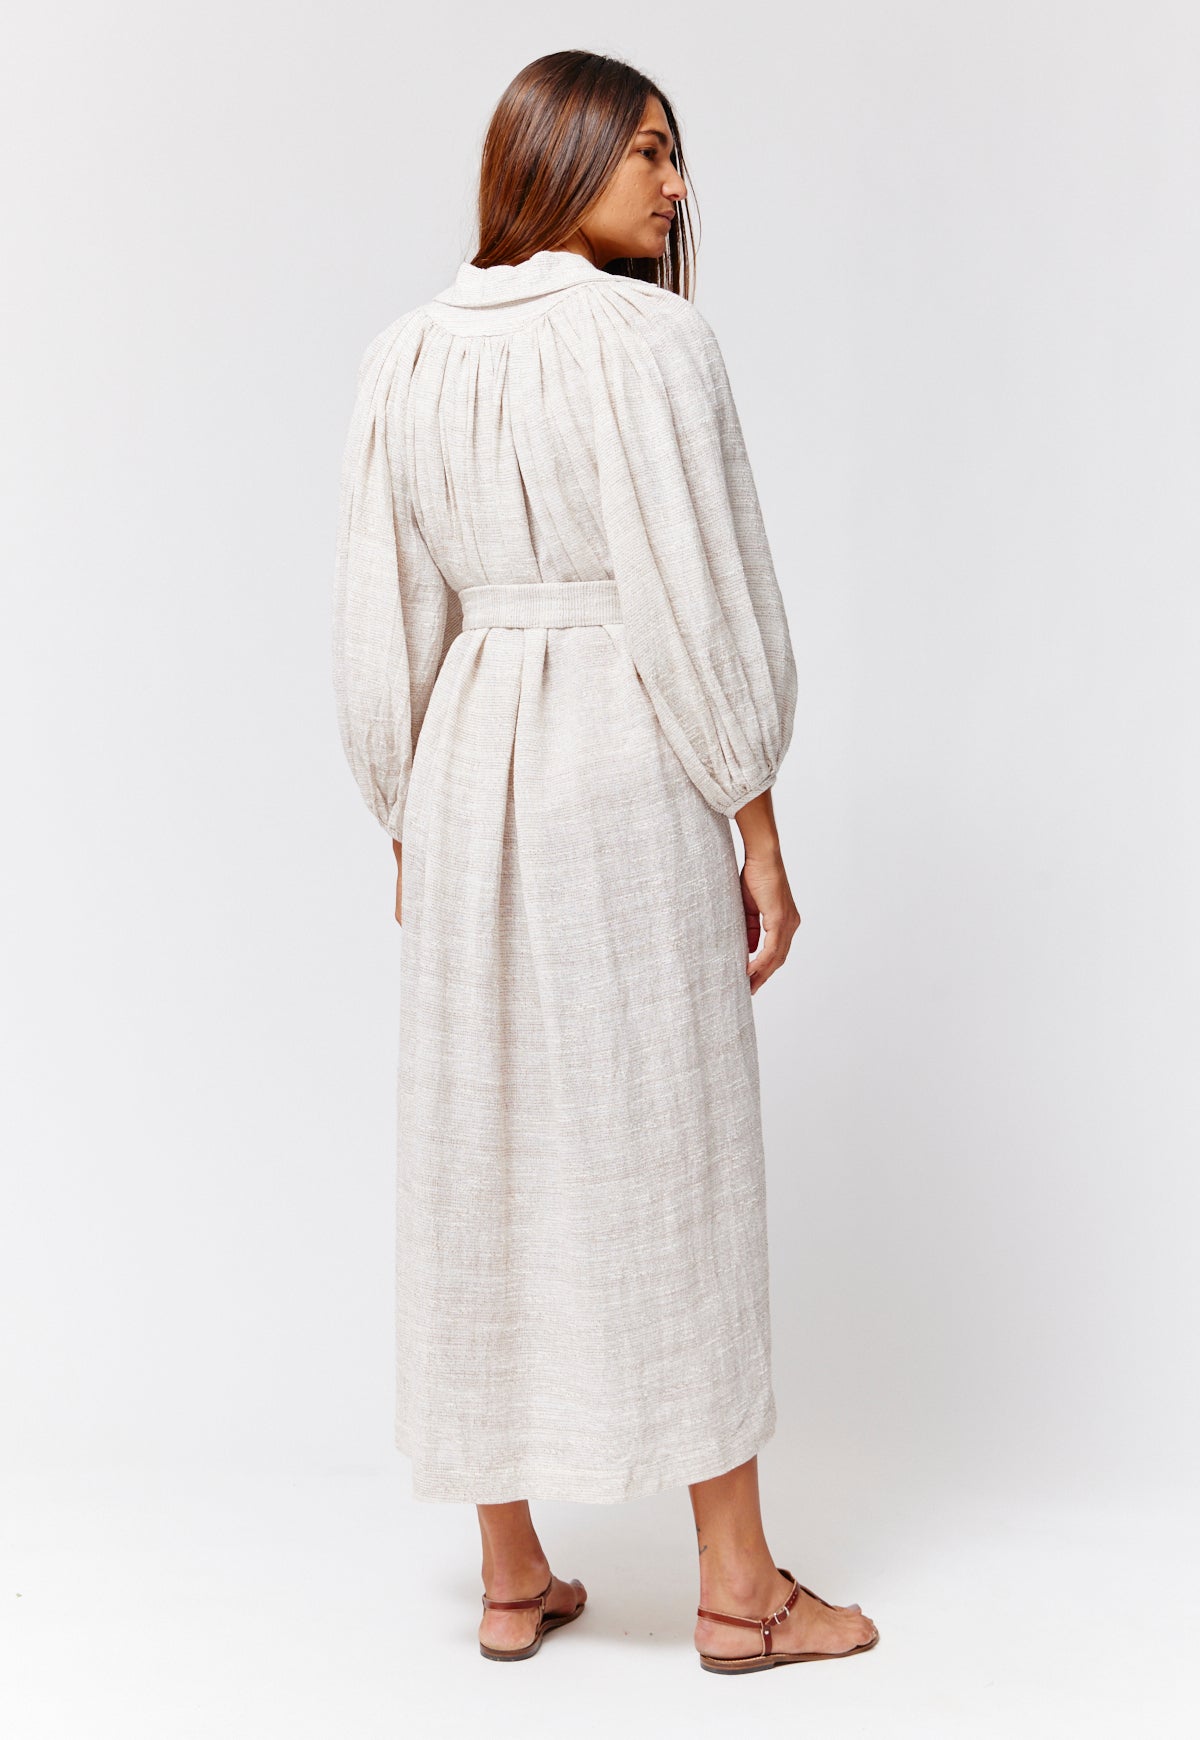 THE POET DRESS in NATURAL STRIPED GAUZE